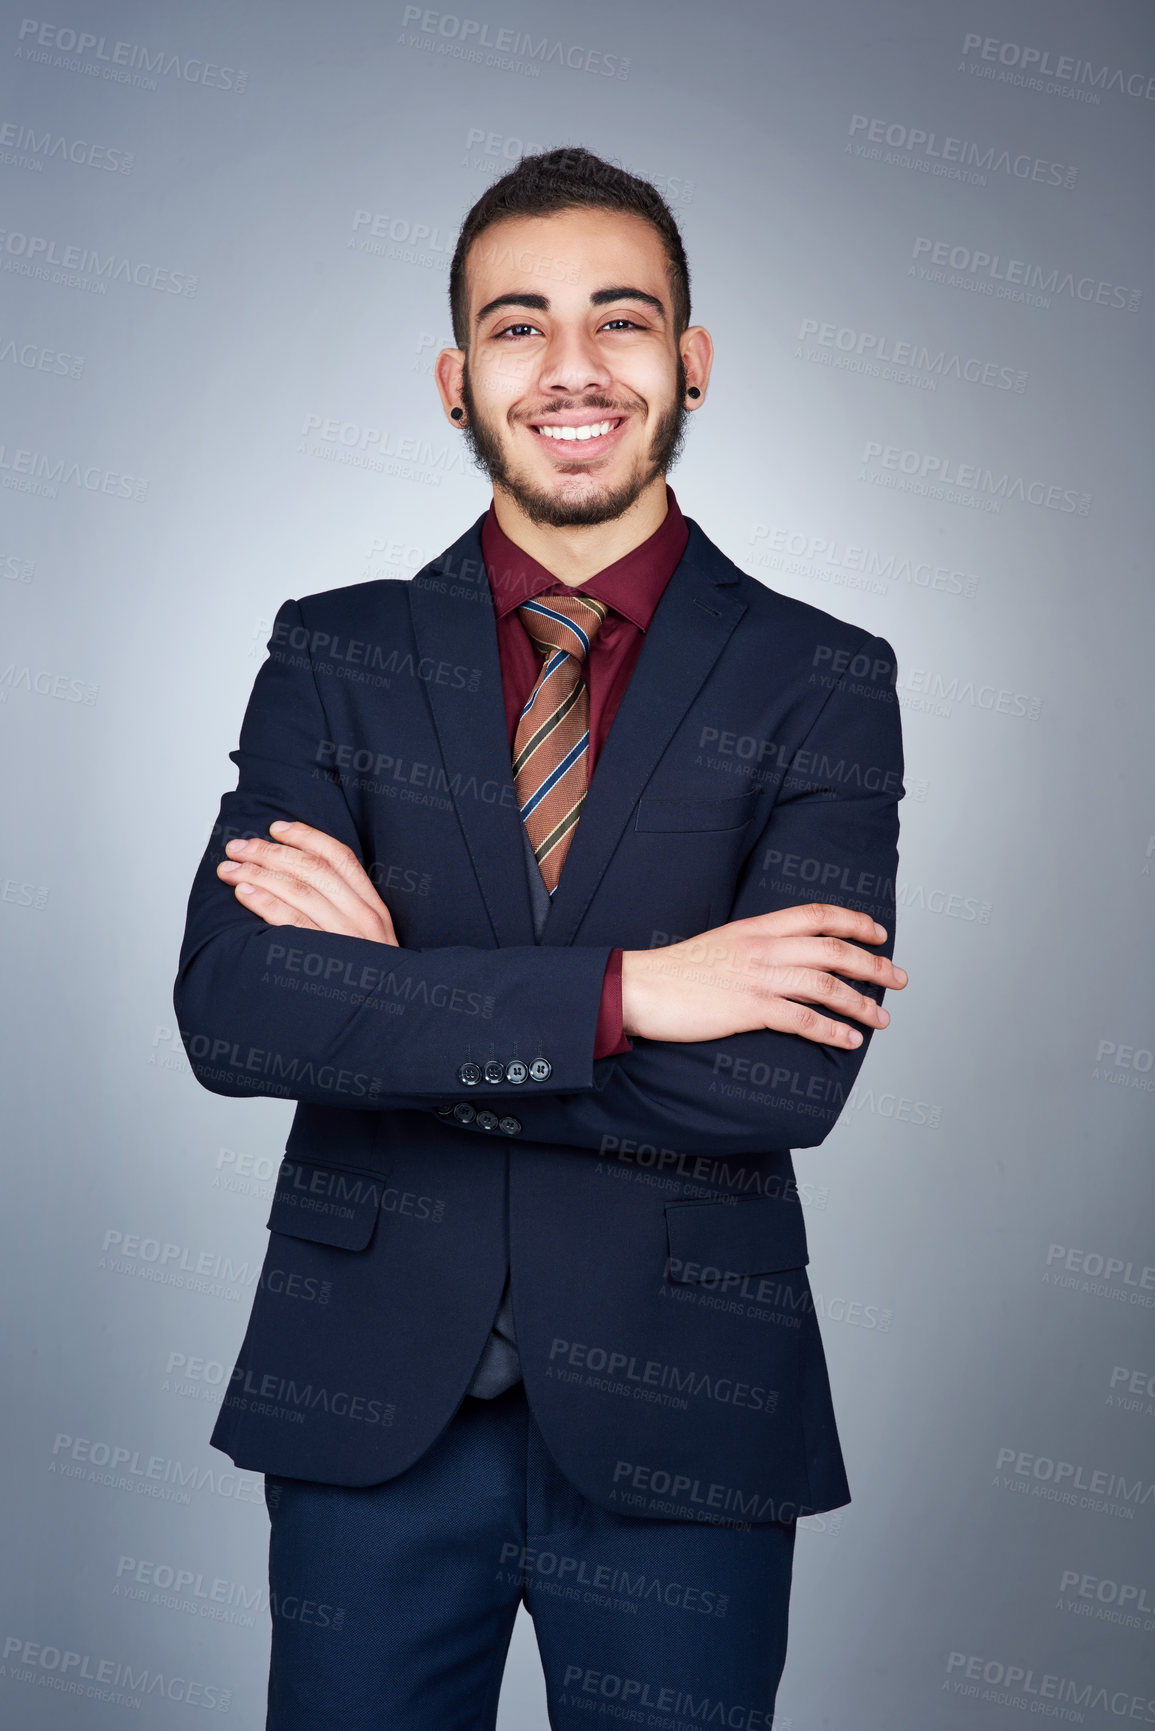 Buy stock photo Studio shot of a handsome young businessman posing against a grey background